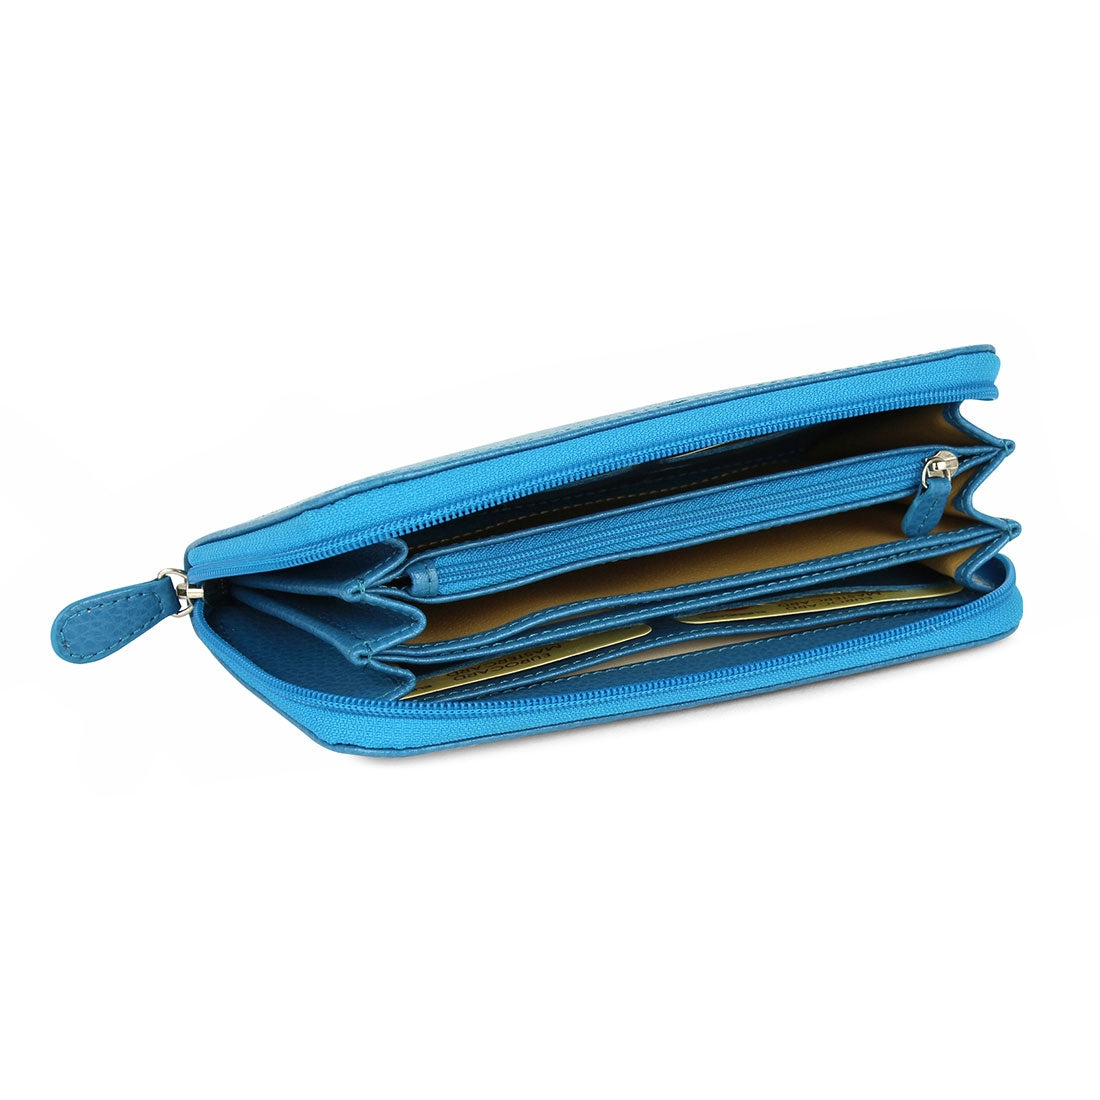 Wallet / Clutch - Turquoise#colour_laurige-turquoise